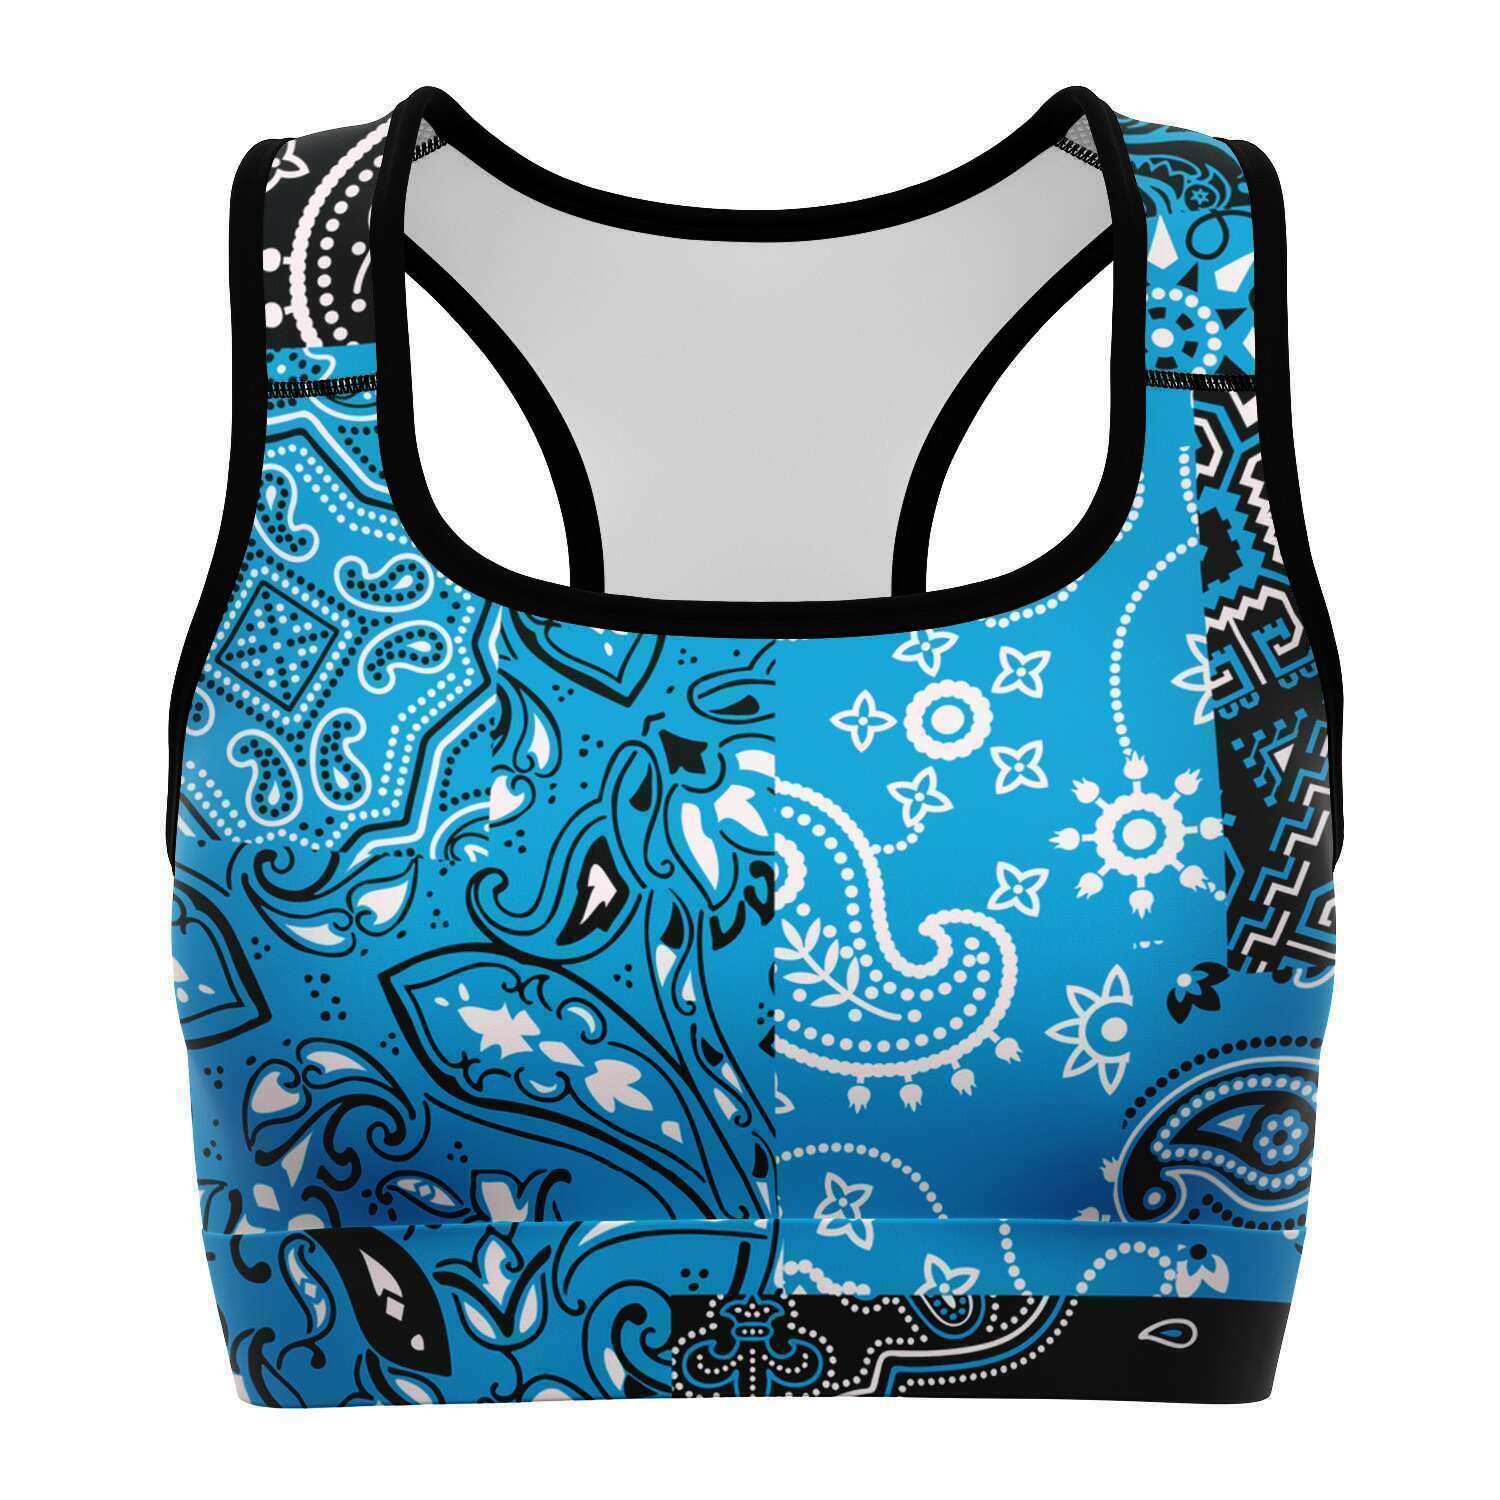 Women's Teal Paisley Patchwork Athletic Sports Bra